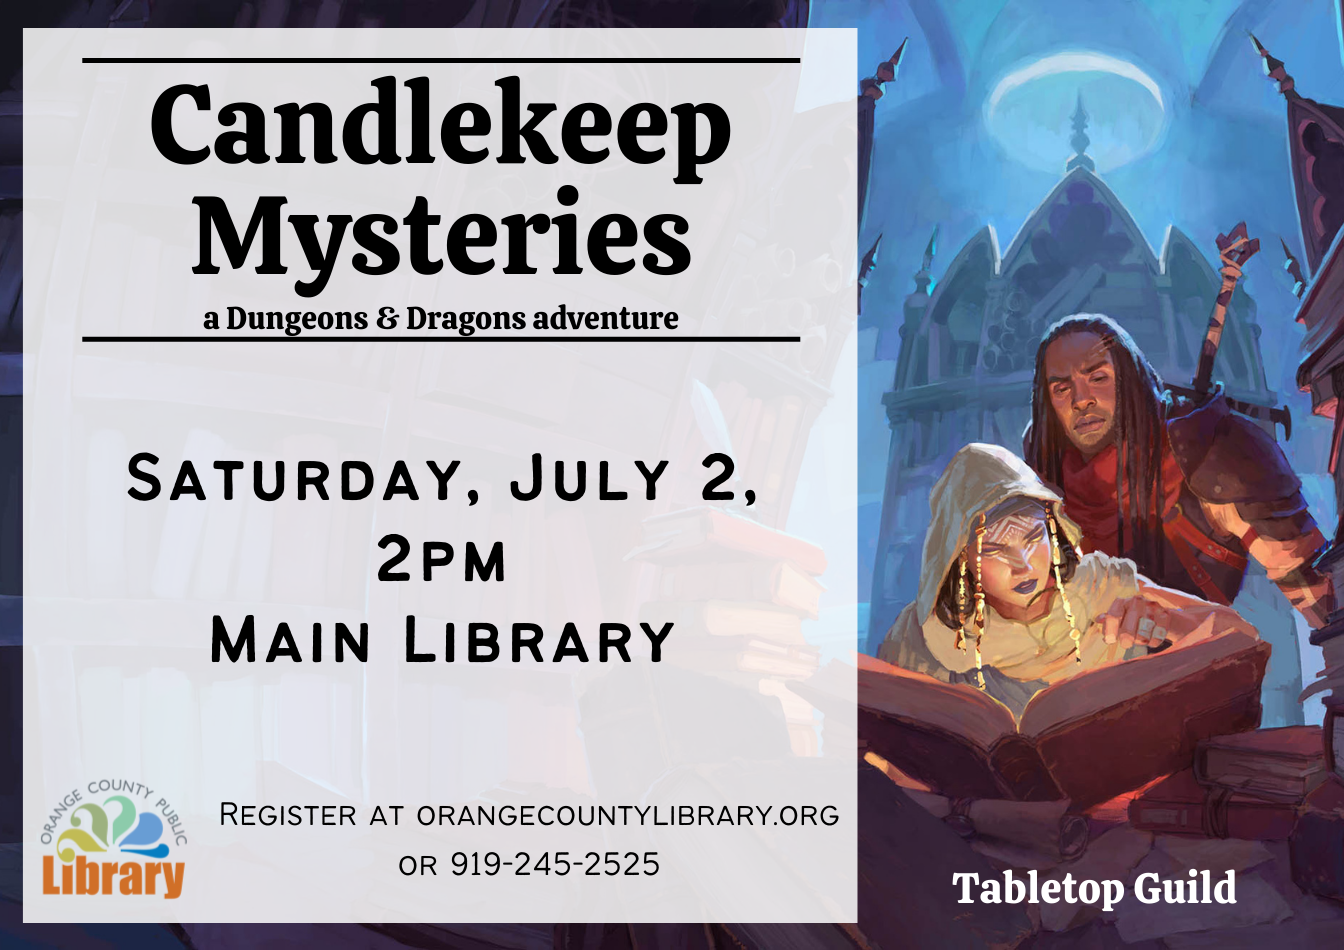 Candlekeep Mysteries: a D&D adventure. Saturday, July 2, 2pm, Main Library.